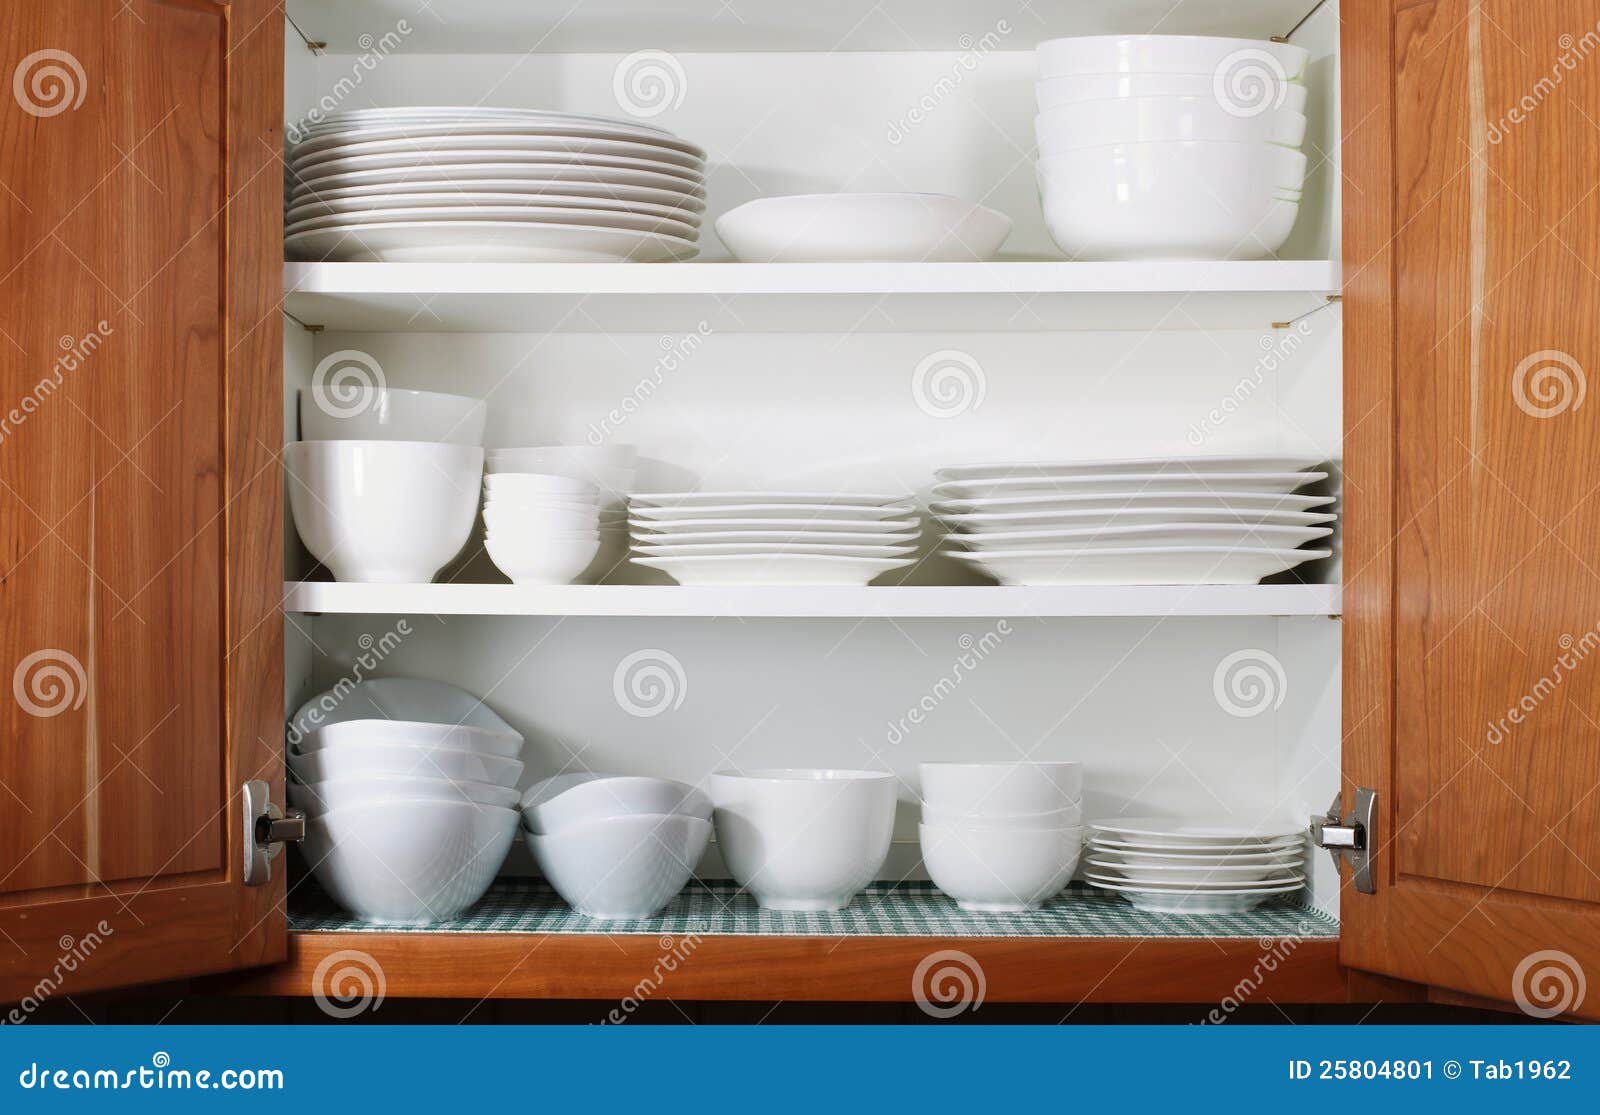 new white dishes and bowls in kitchen cabinet